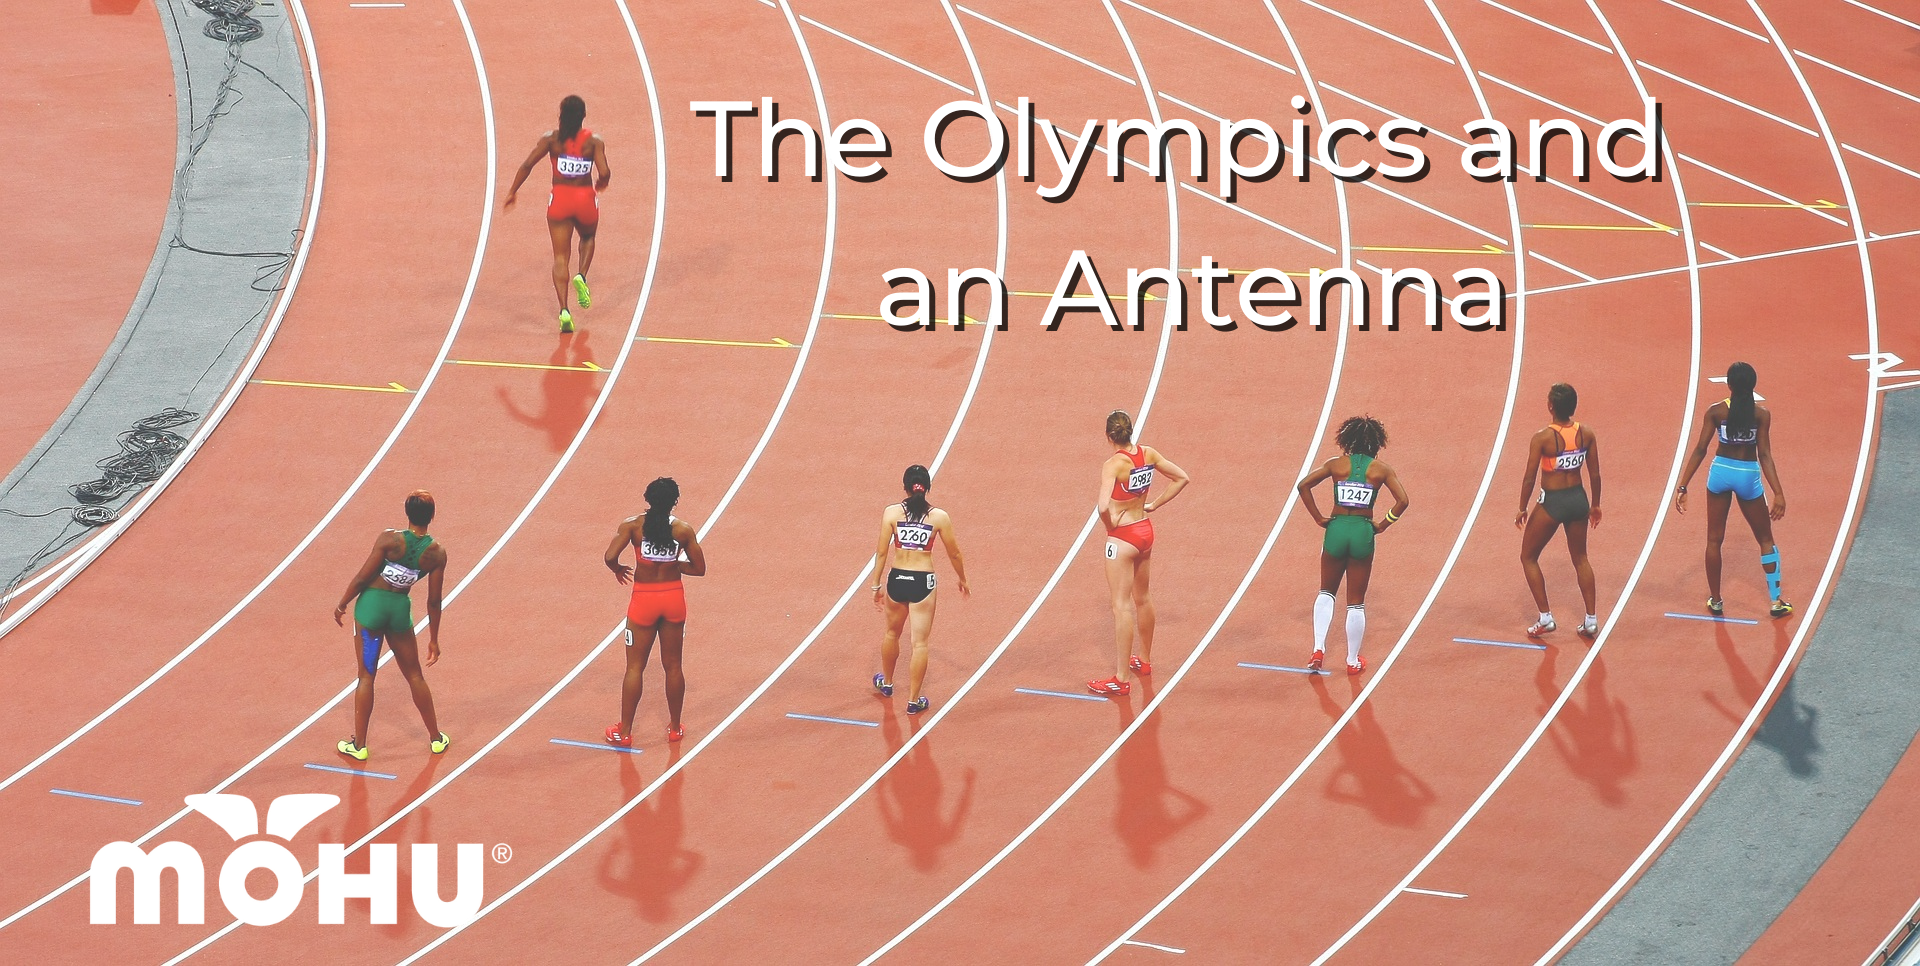 Olympic female runners on a track, The Olympics and an Antenna, Mohu